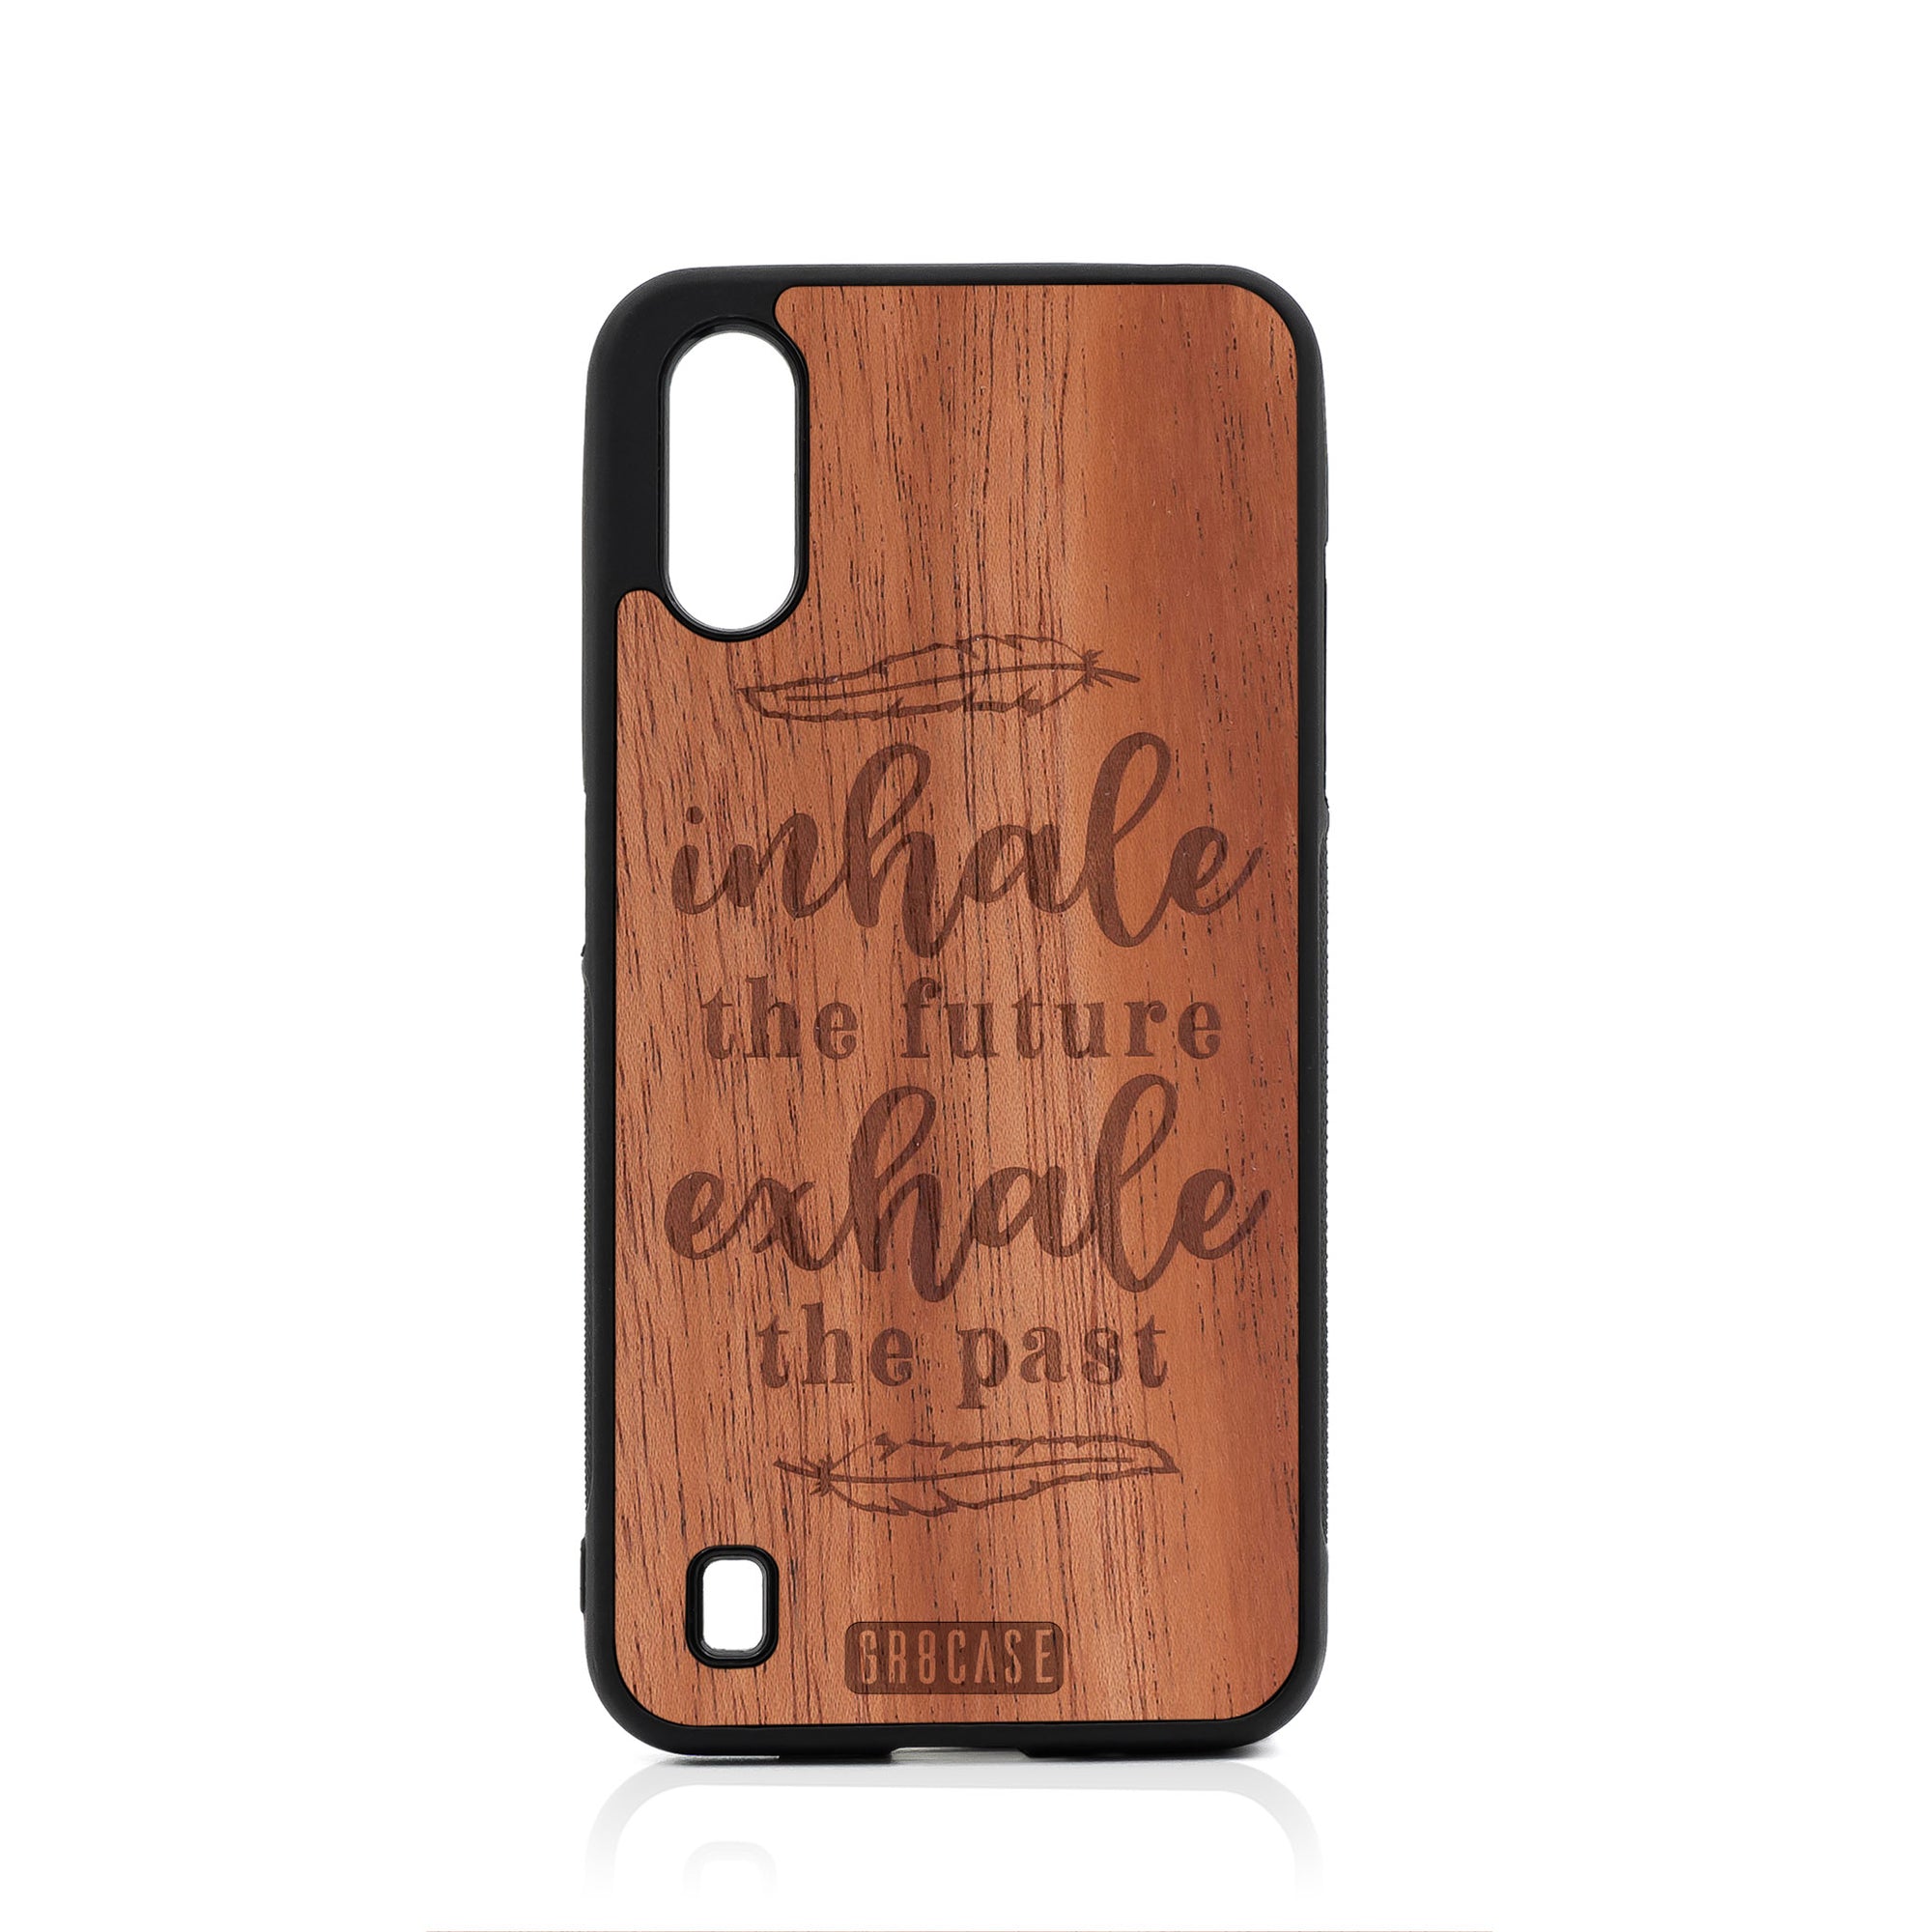 Inhale The Future Exhale The Past Design Wood Case For Samsung Galaxy A01